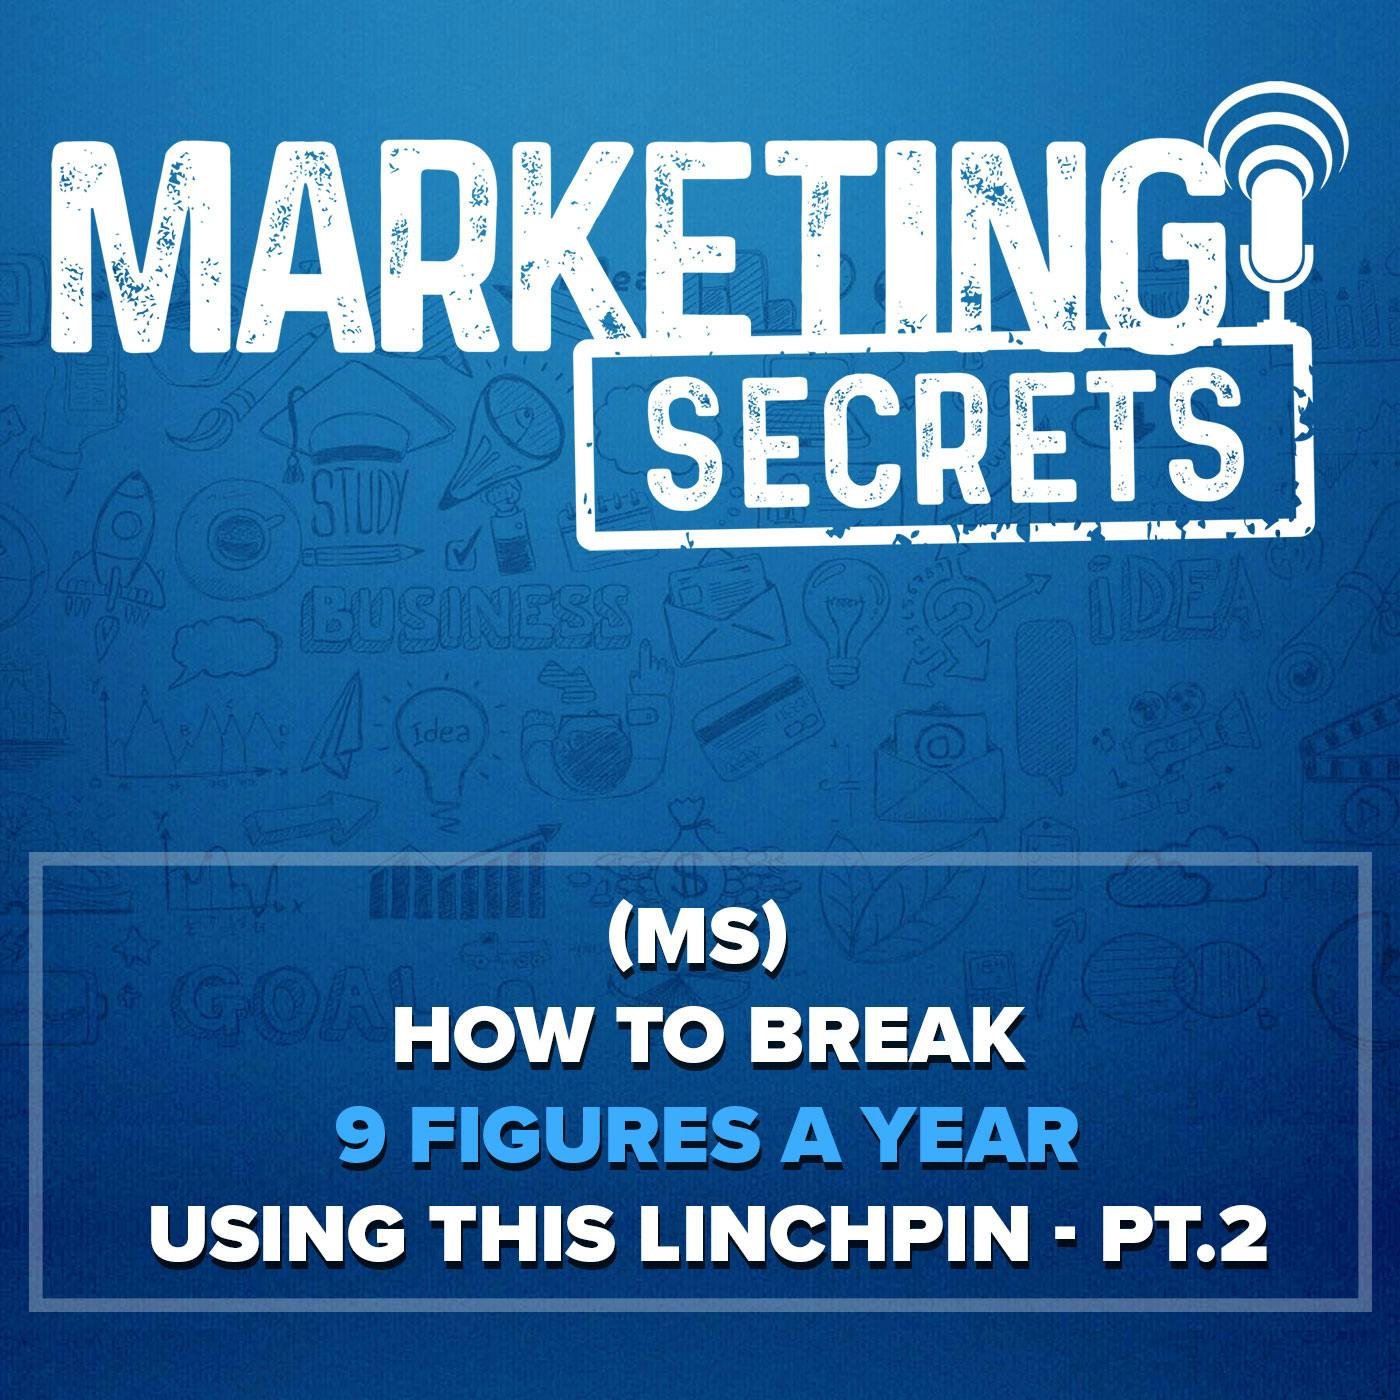 (MS) How To Break 9 Figures a Year Using this Linchpin - Part 2